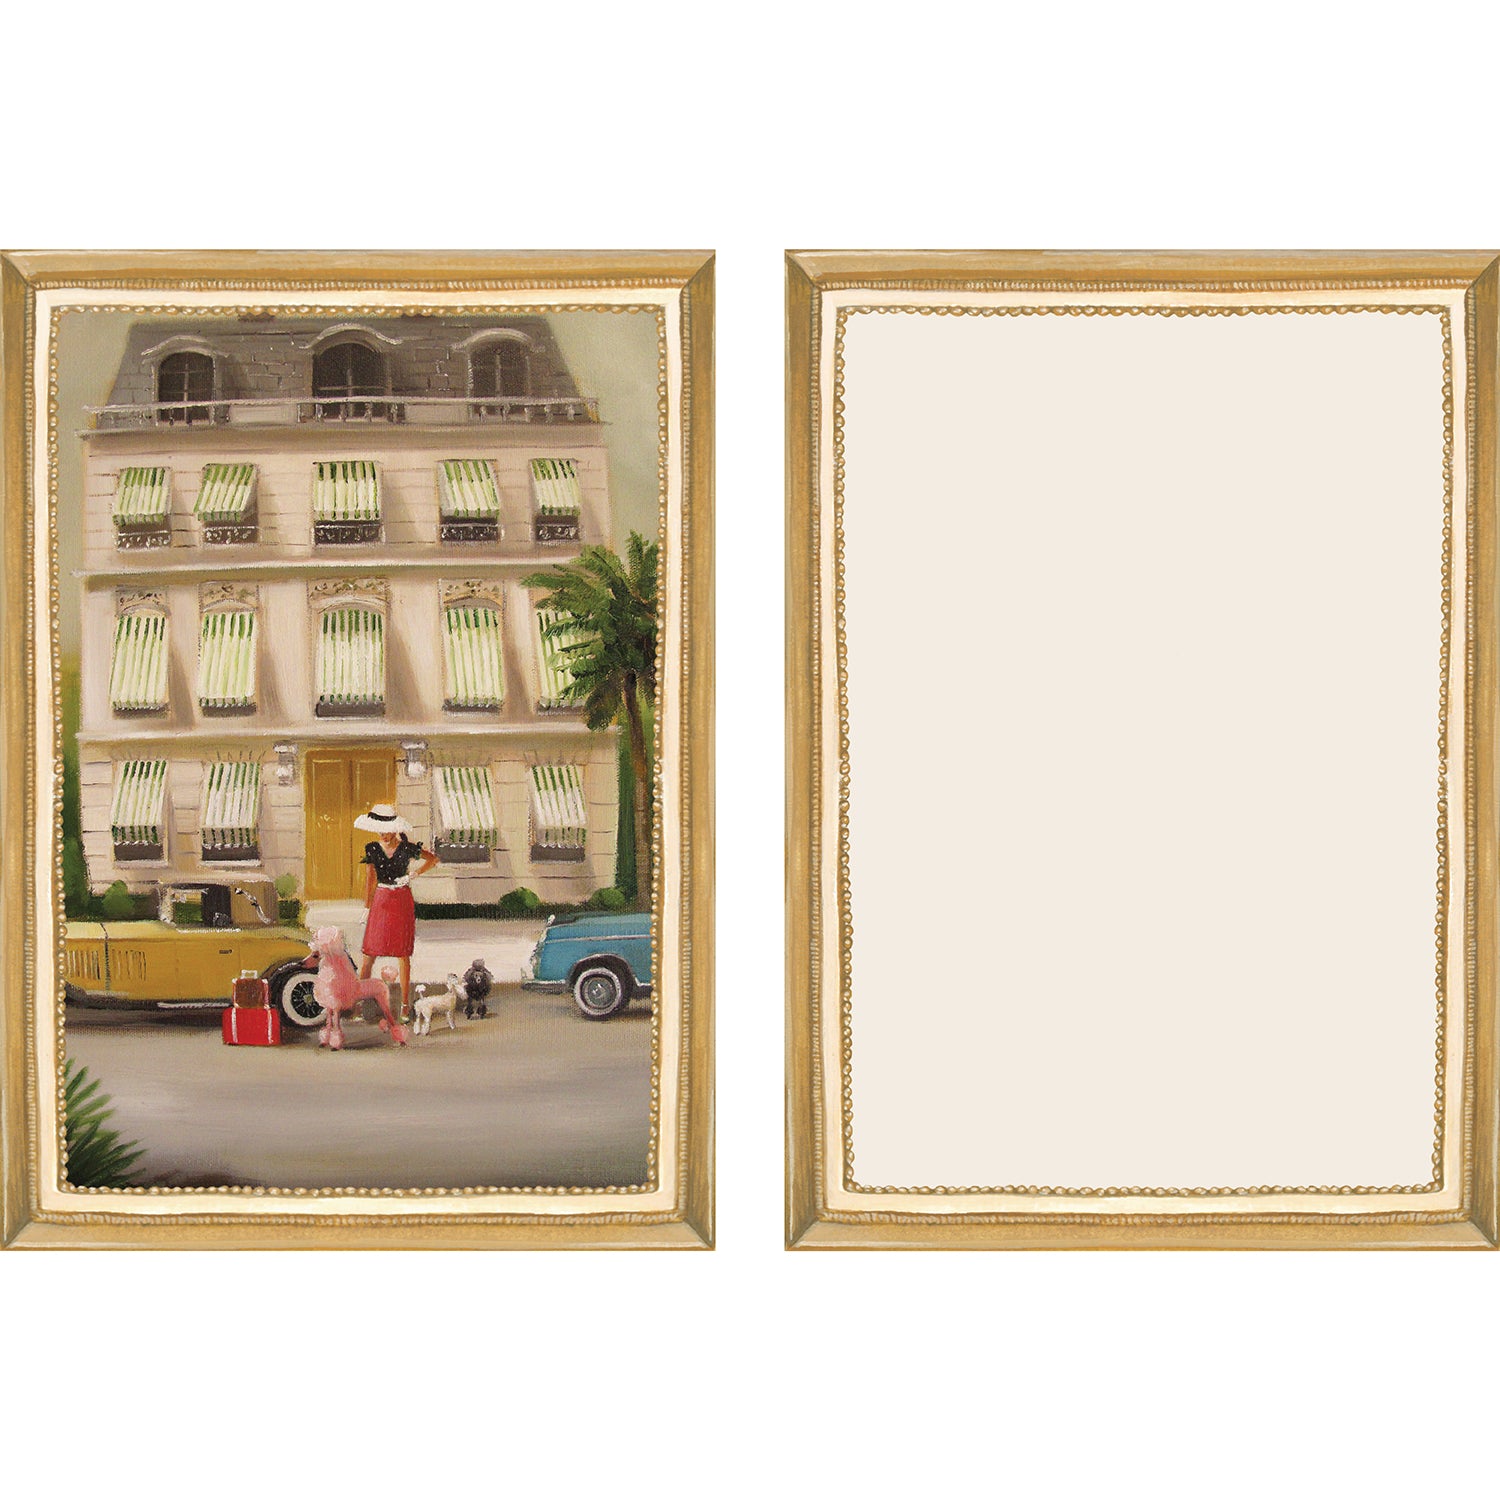 A set of six framed pictures with a Jet Setter Flat Note Boxed Set of 6 Cards from Hester &amp; Cook in the background, embodying travel-inspired artwork.